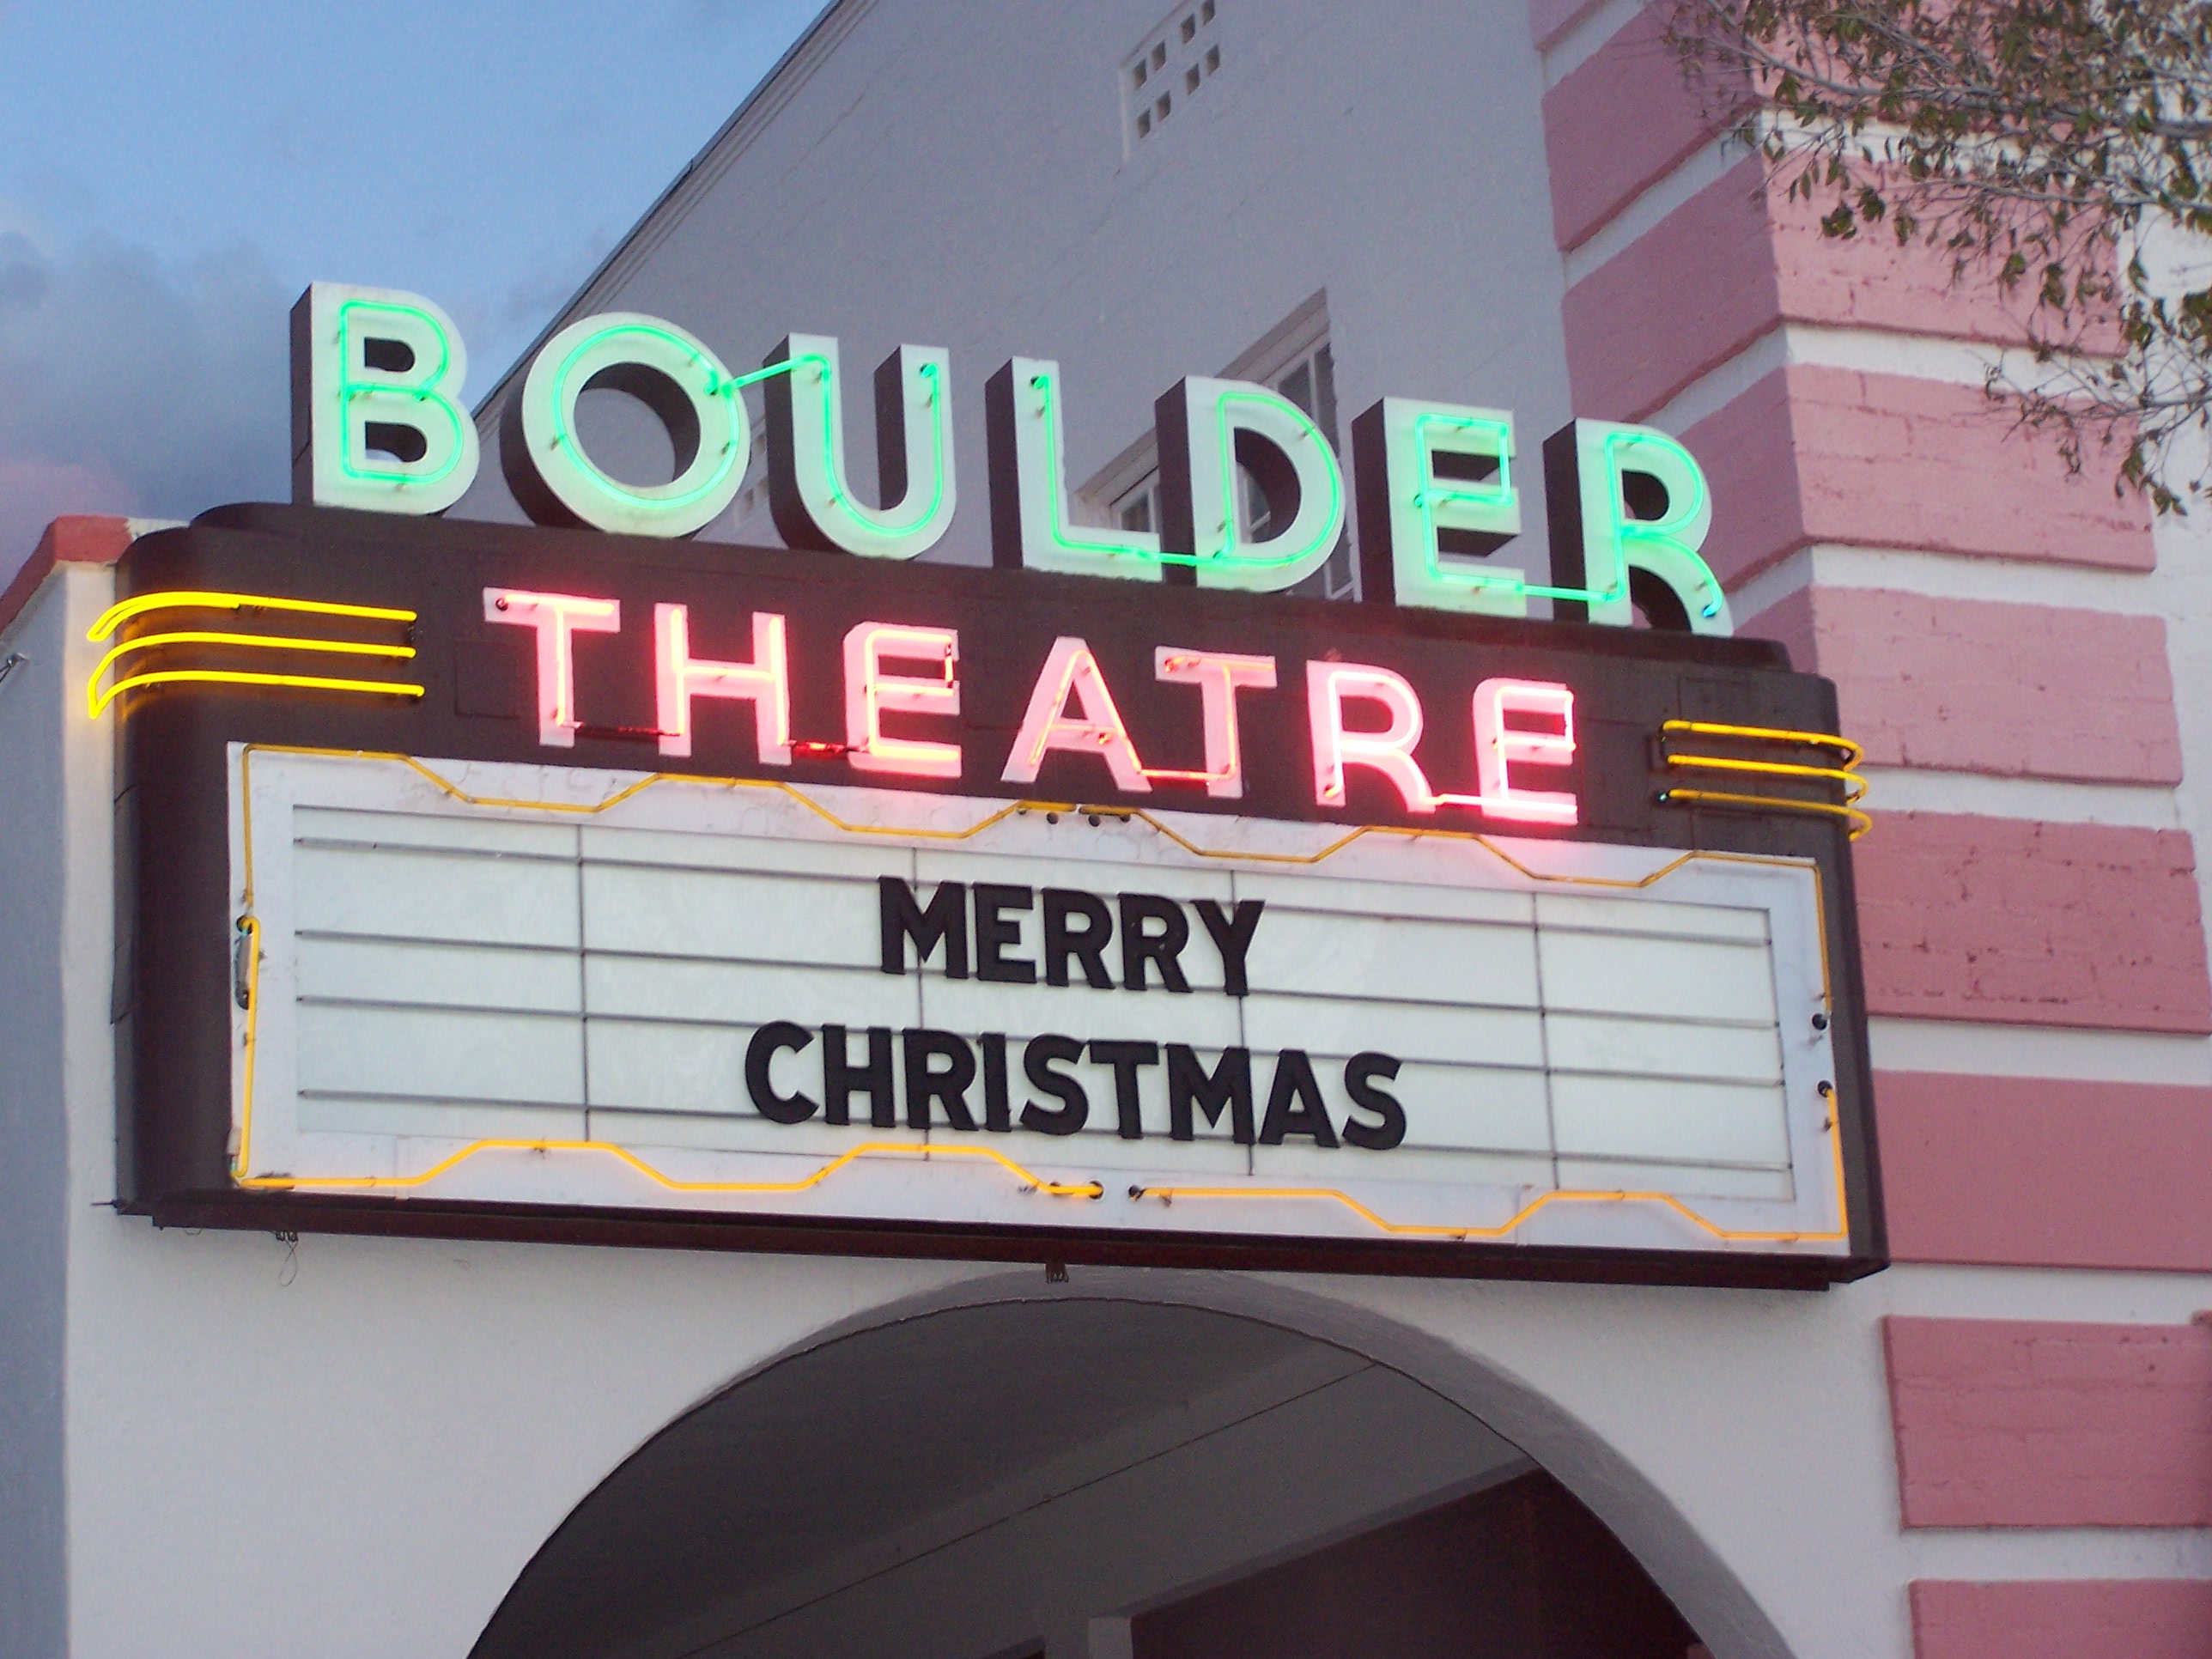 The marquees are original to the Boulder Theatre which was built in 1932.